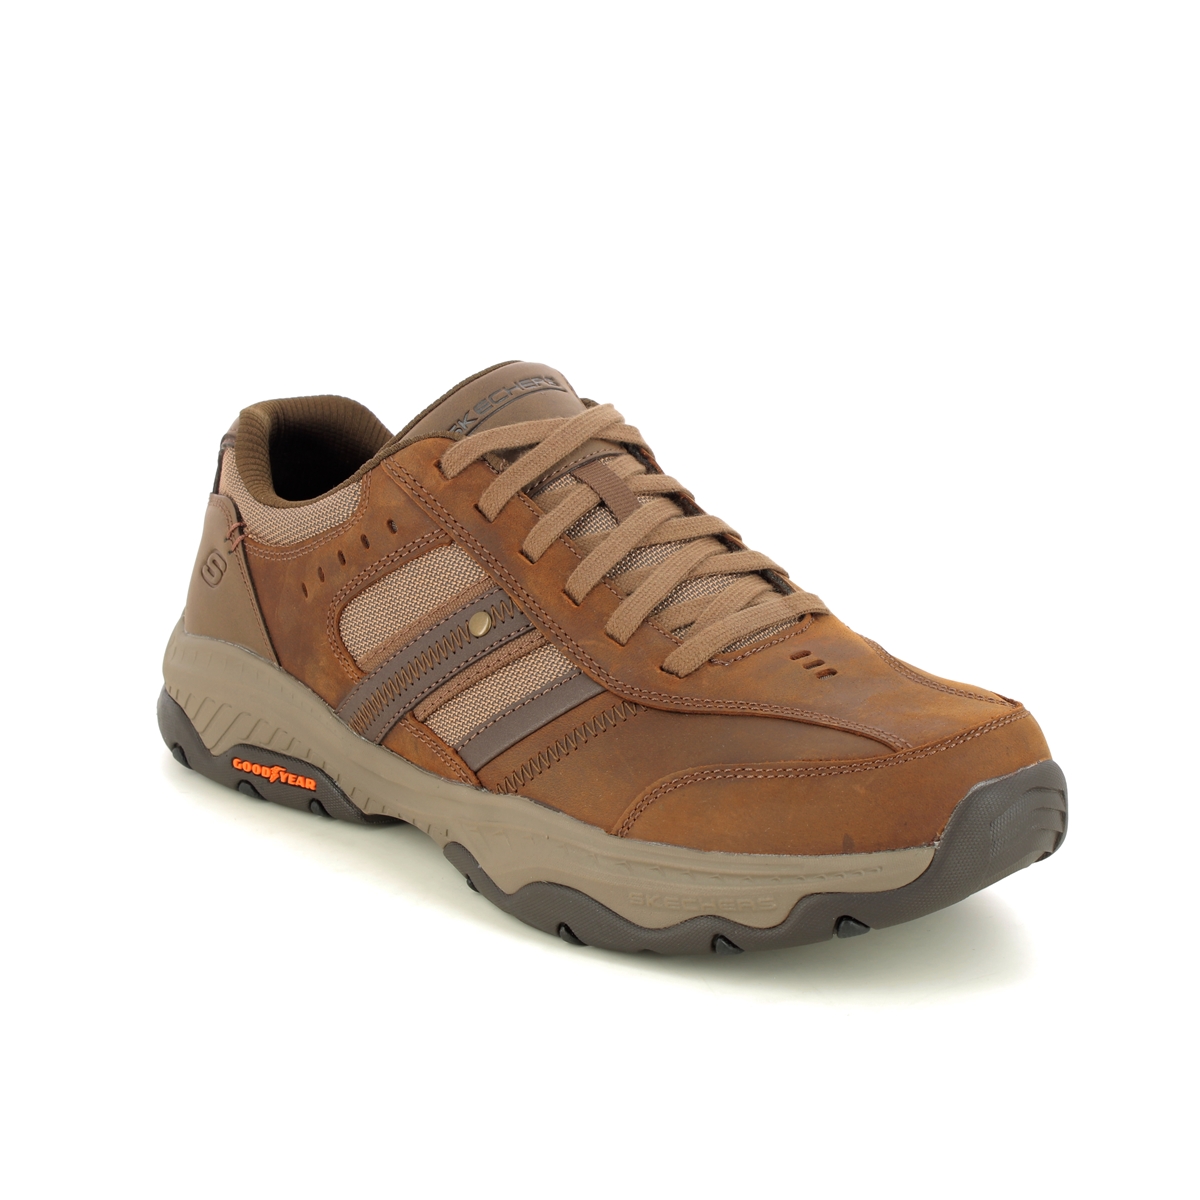 Skechers Craster Archdale CDB Brown Mens comfort shoes 204717 in a Plain Leather in Size 8